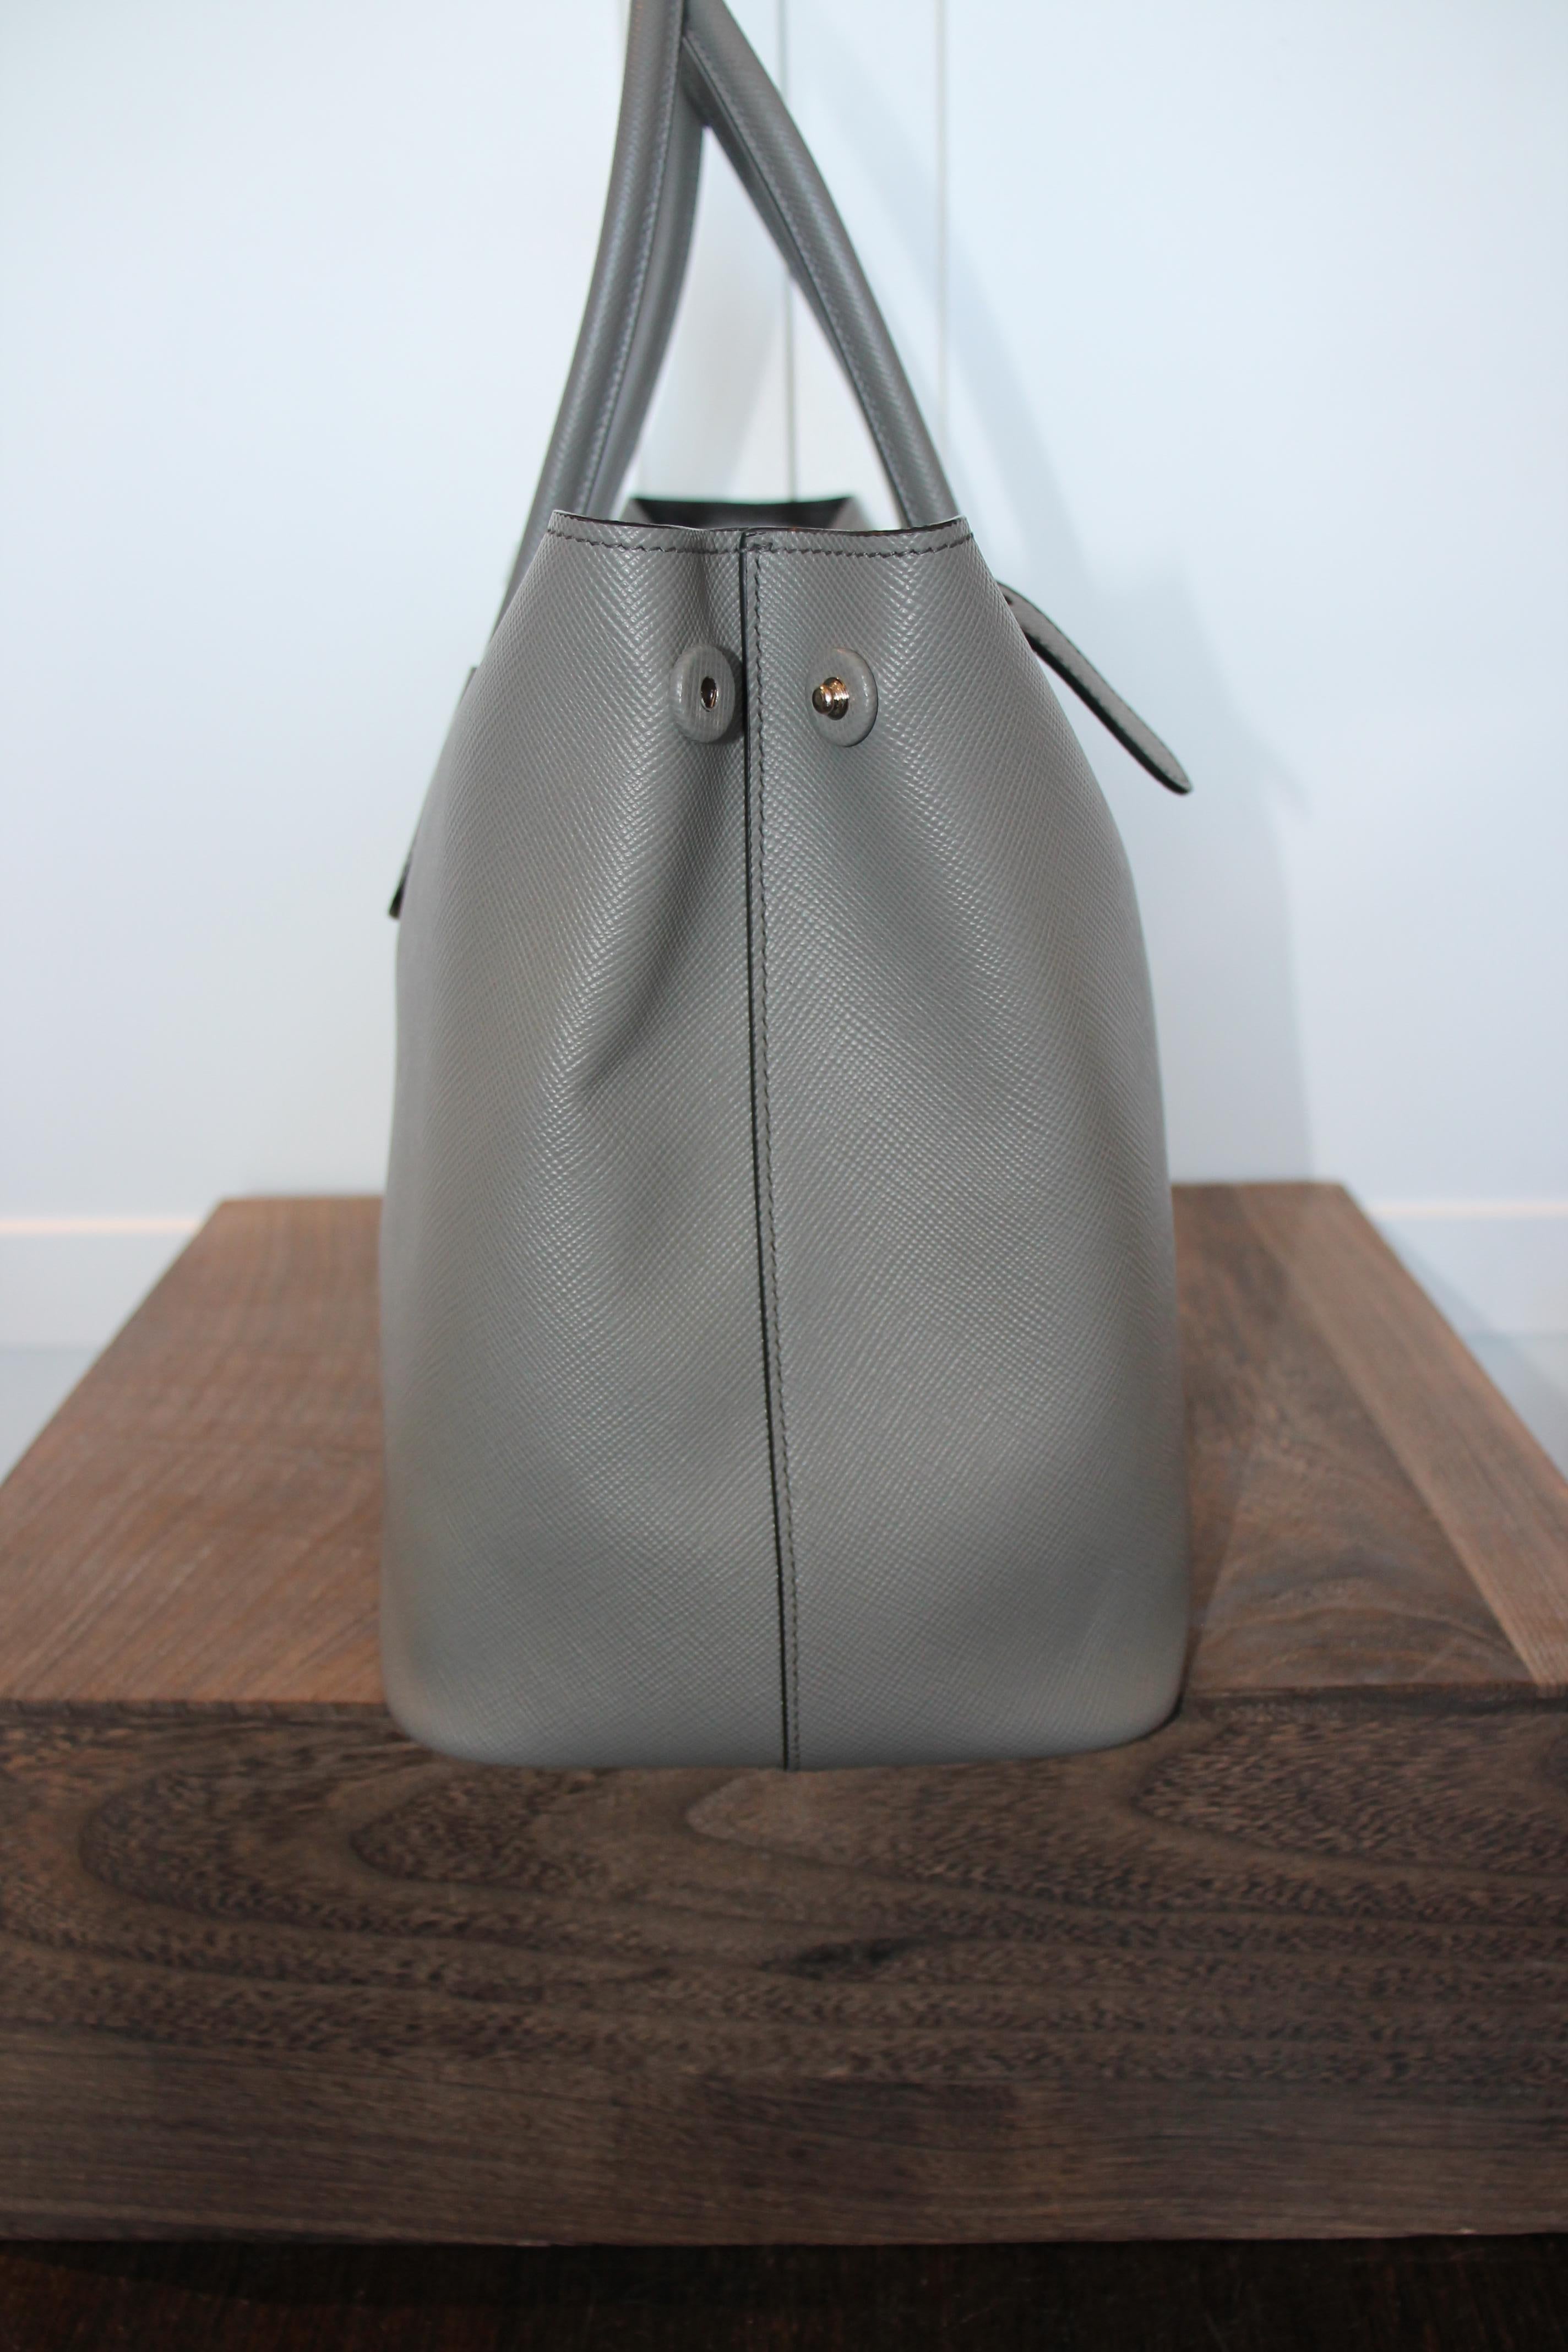 Gray grained leather. Silver-tone hardware. Opened top with fold over closure with buckle closures. Dual top rolled handles. Prada logo at front. Features detachable dog tag.